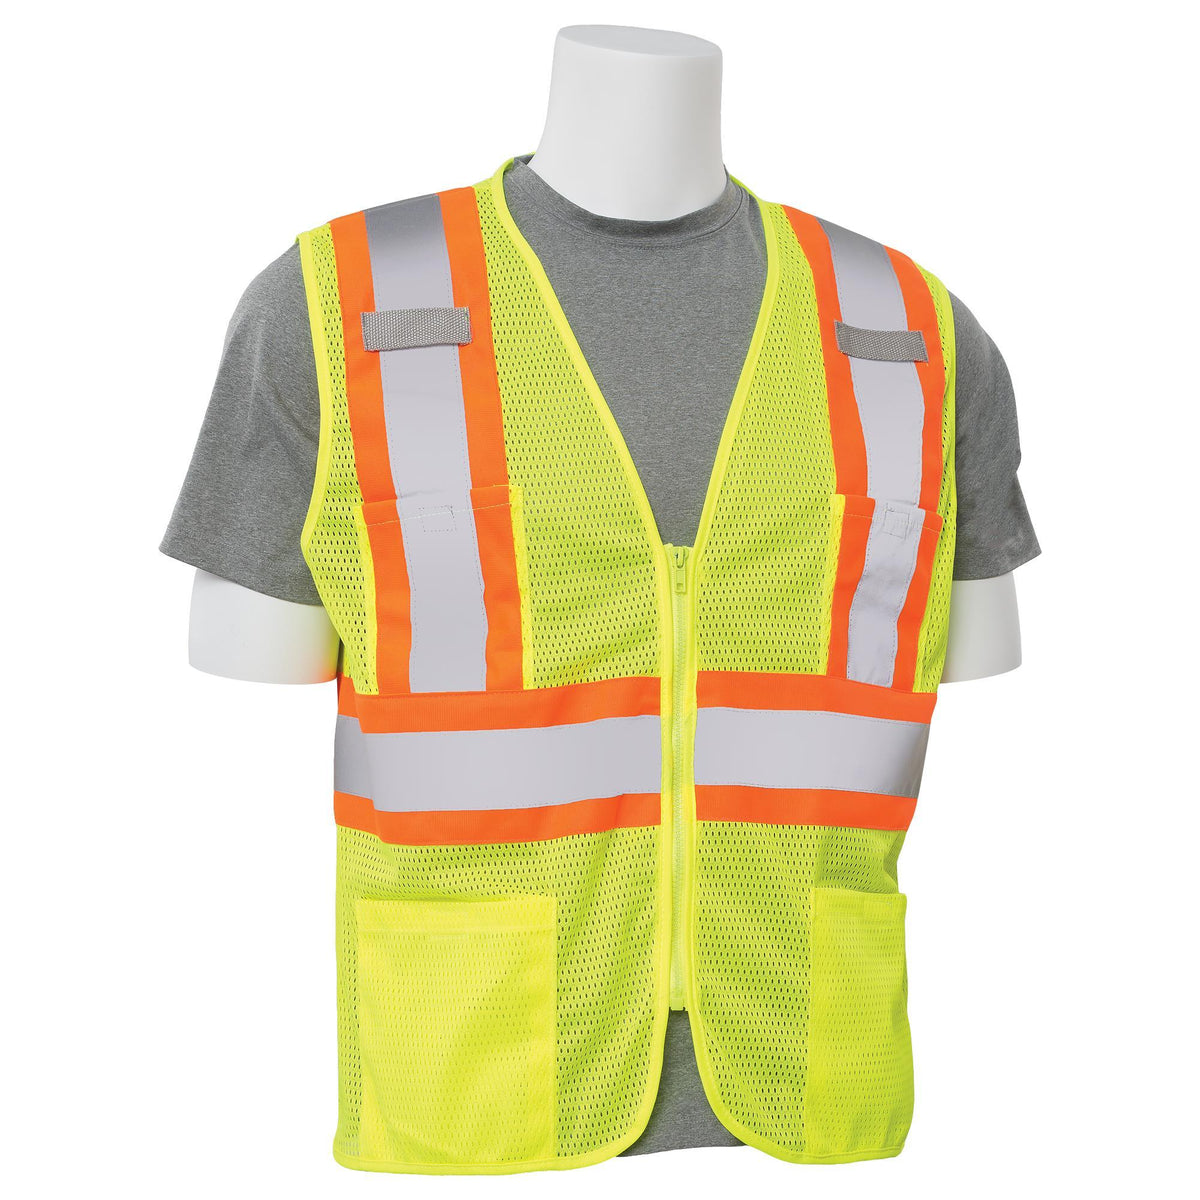 S383P Class 2 Mesh Zipper Safety Vest with Contrasting Tape